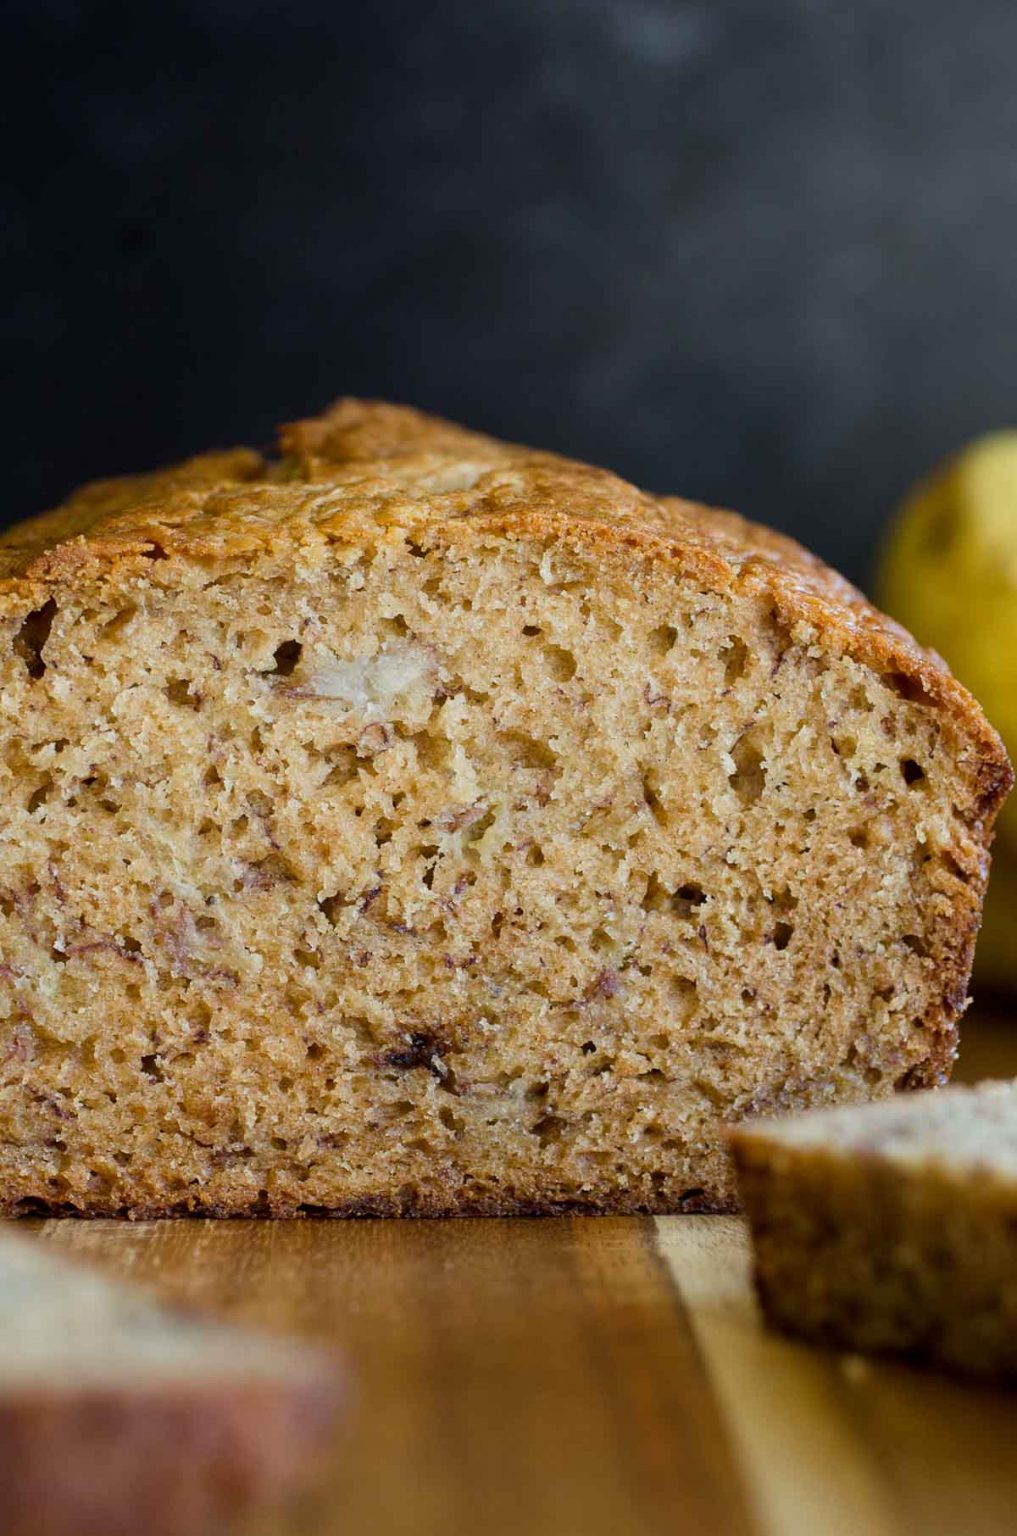 Best Banana Bread Recipe - Easy, Moist, Made with Sour Cream!